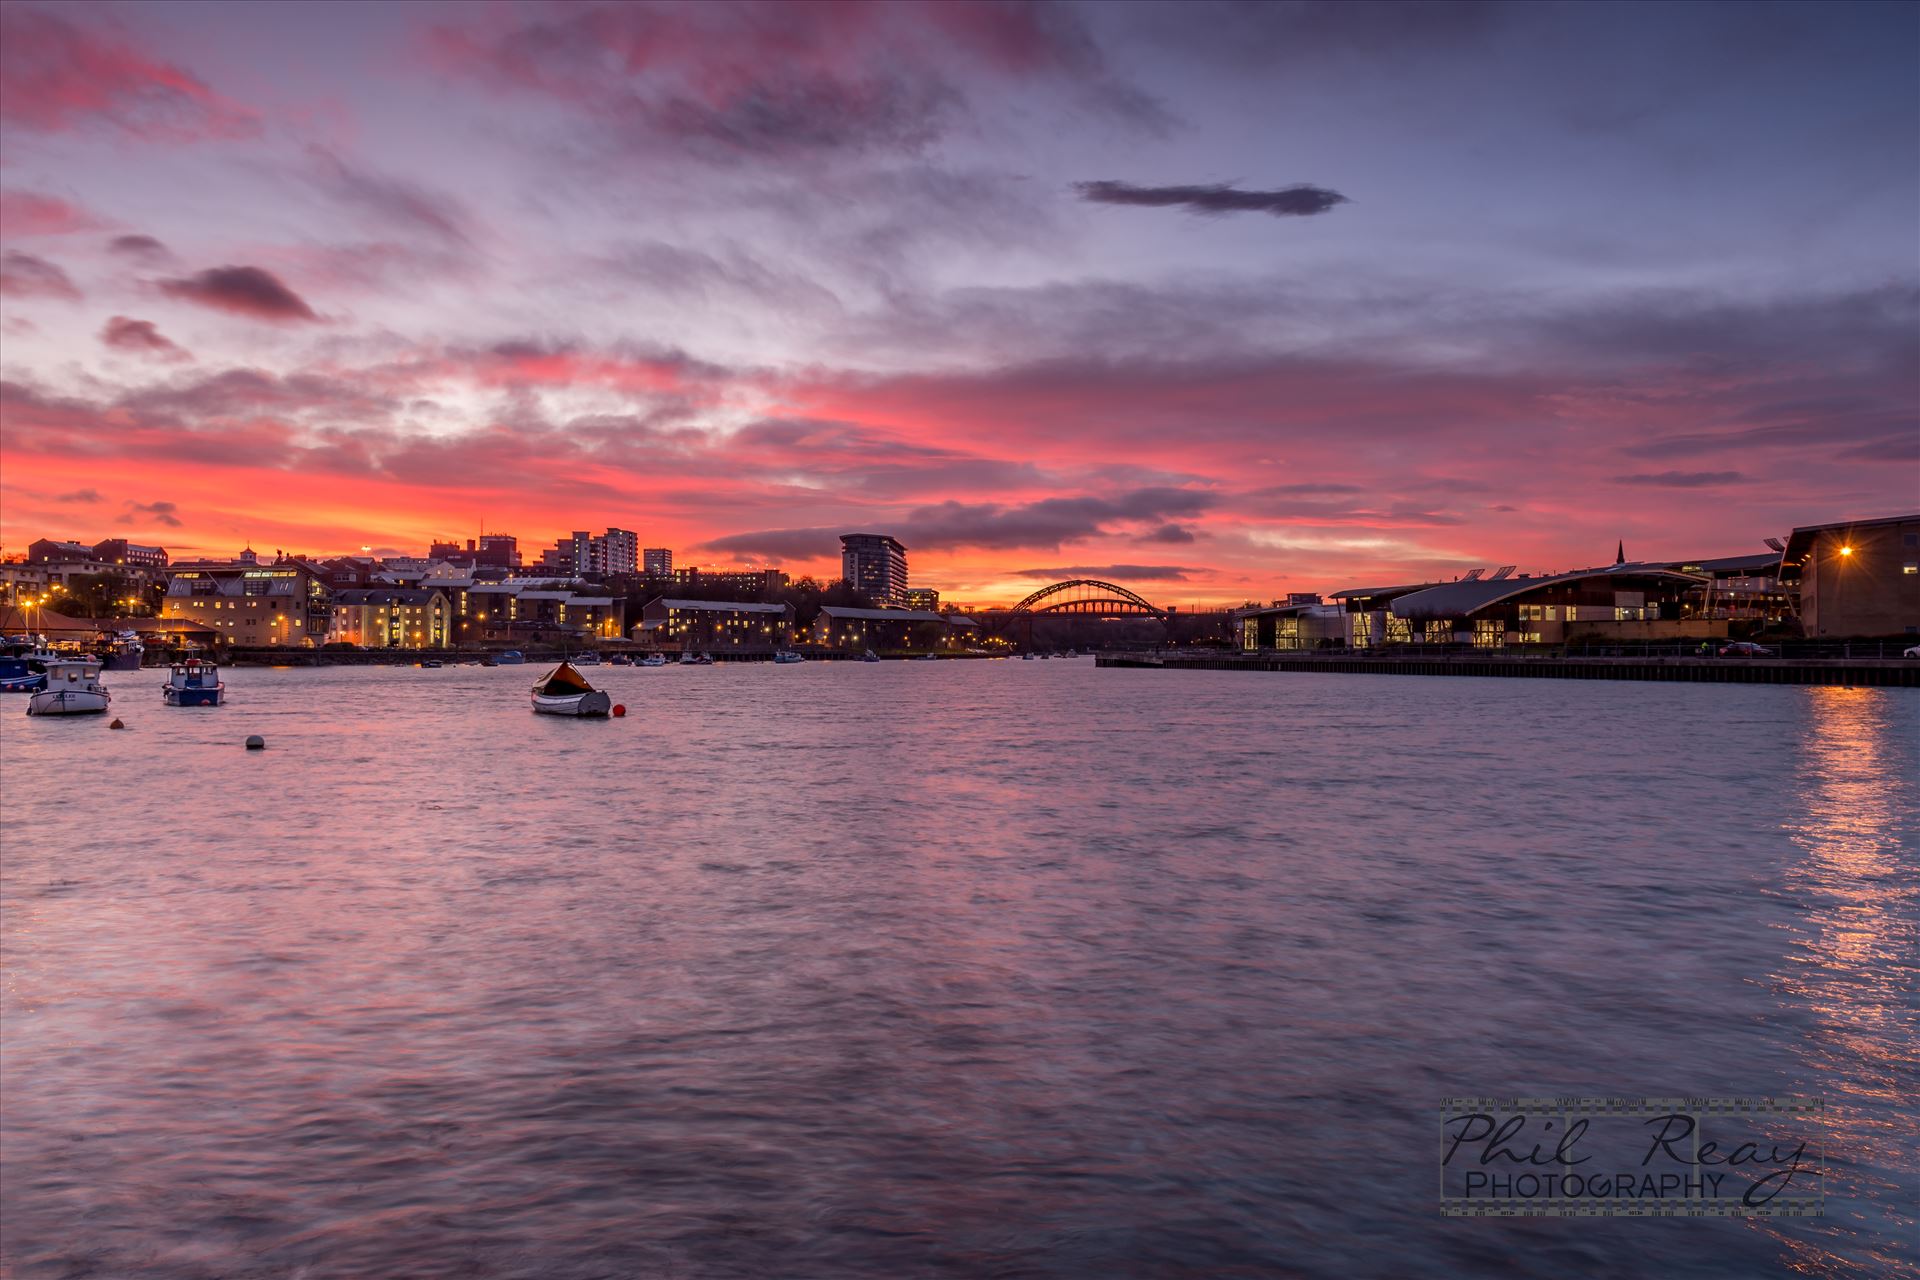 Sunset on the Wear A fabulous sunset at Sunderland Fish Quay by philreay